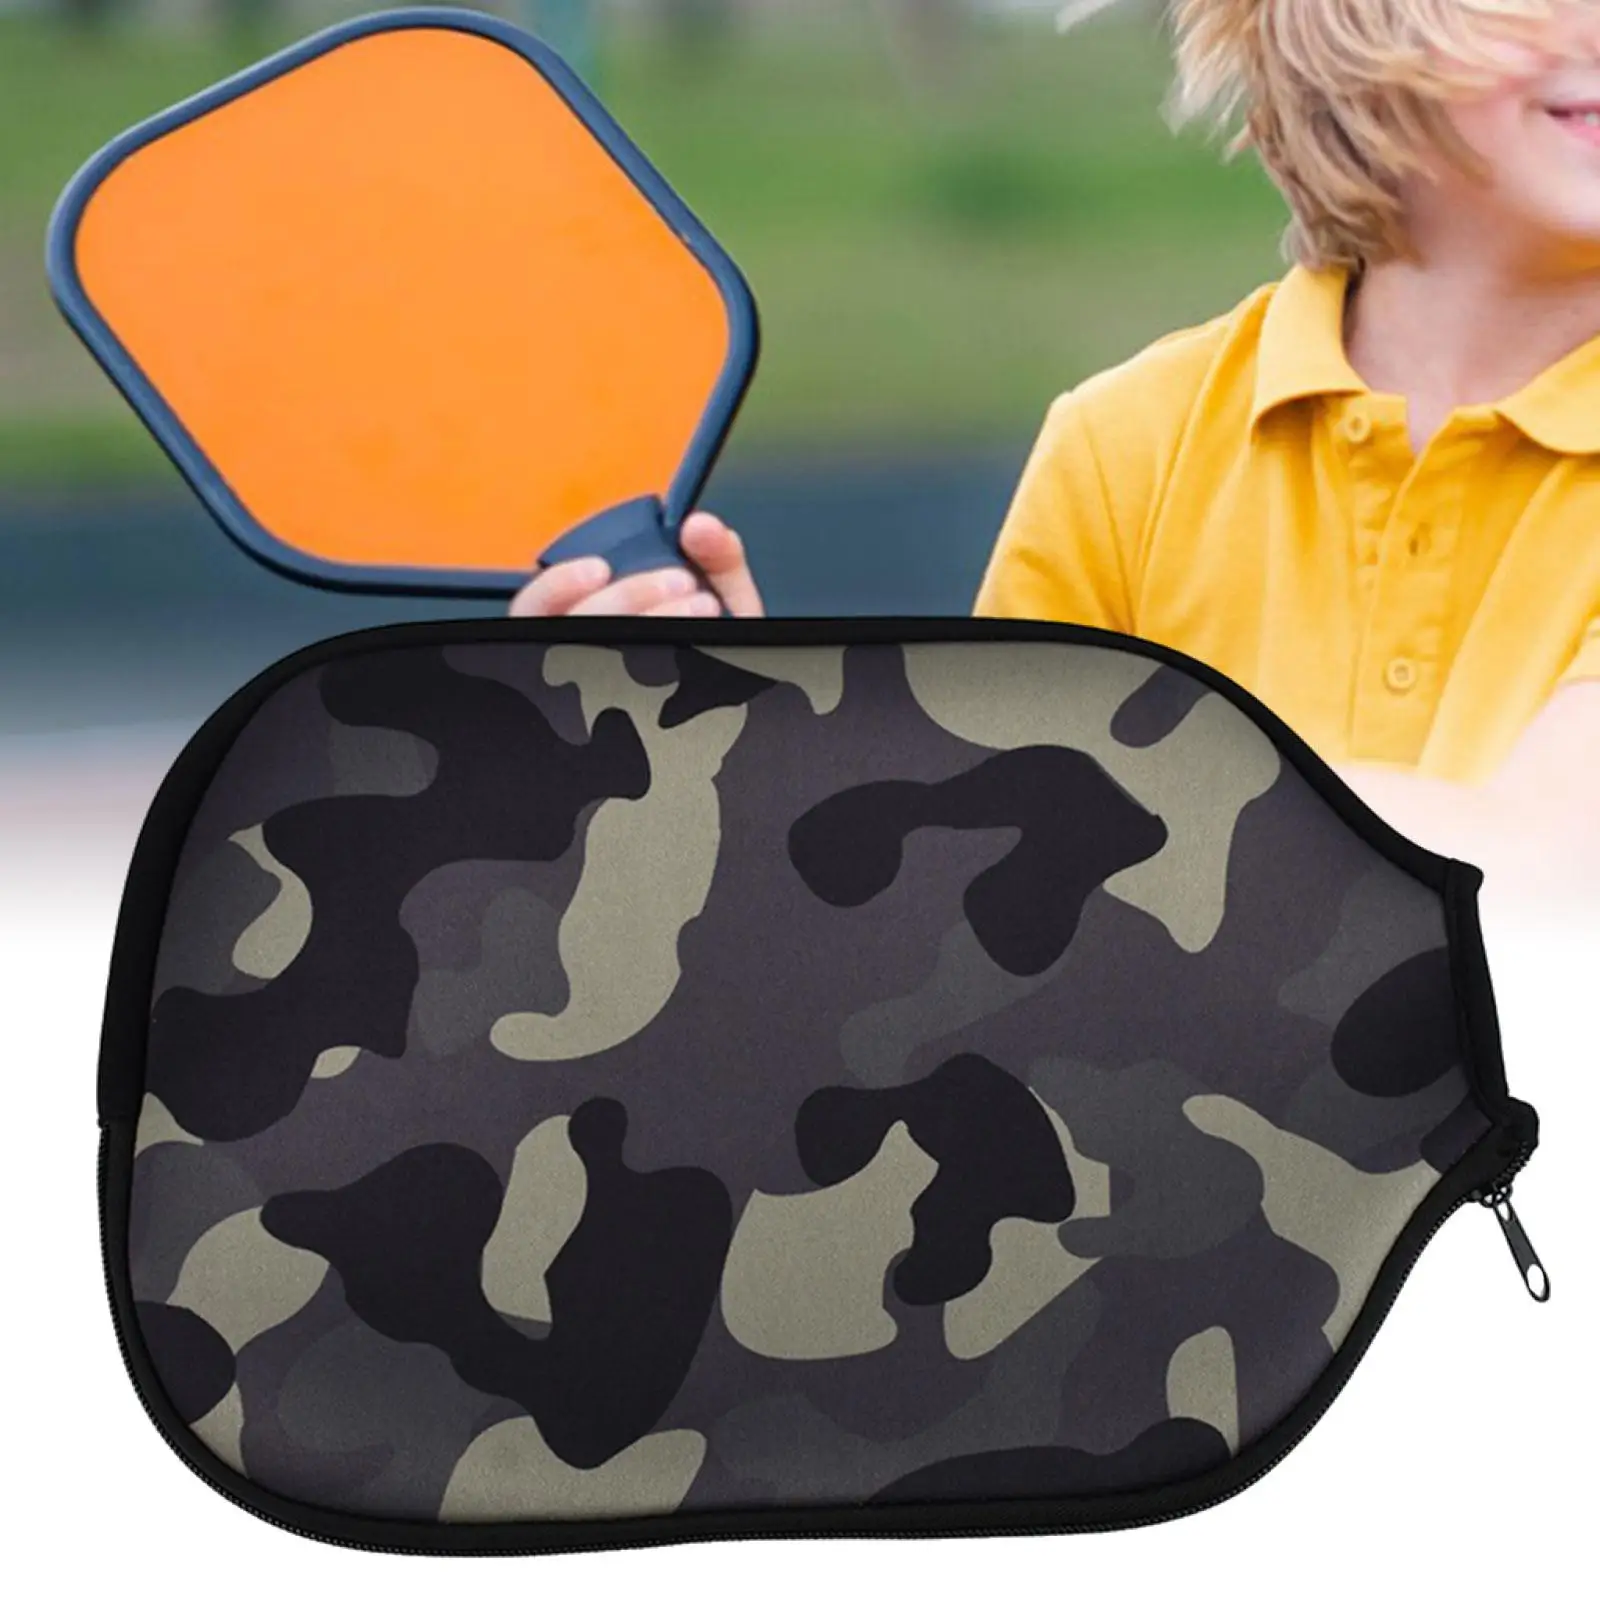 Pickleball Racket Cover Zipper Closure Waterproof Holder Protective Pickleball Racket Cover for Practice Outdoor Sports Training